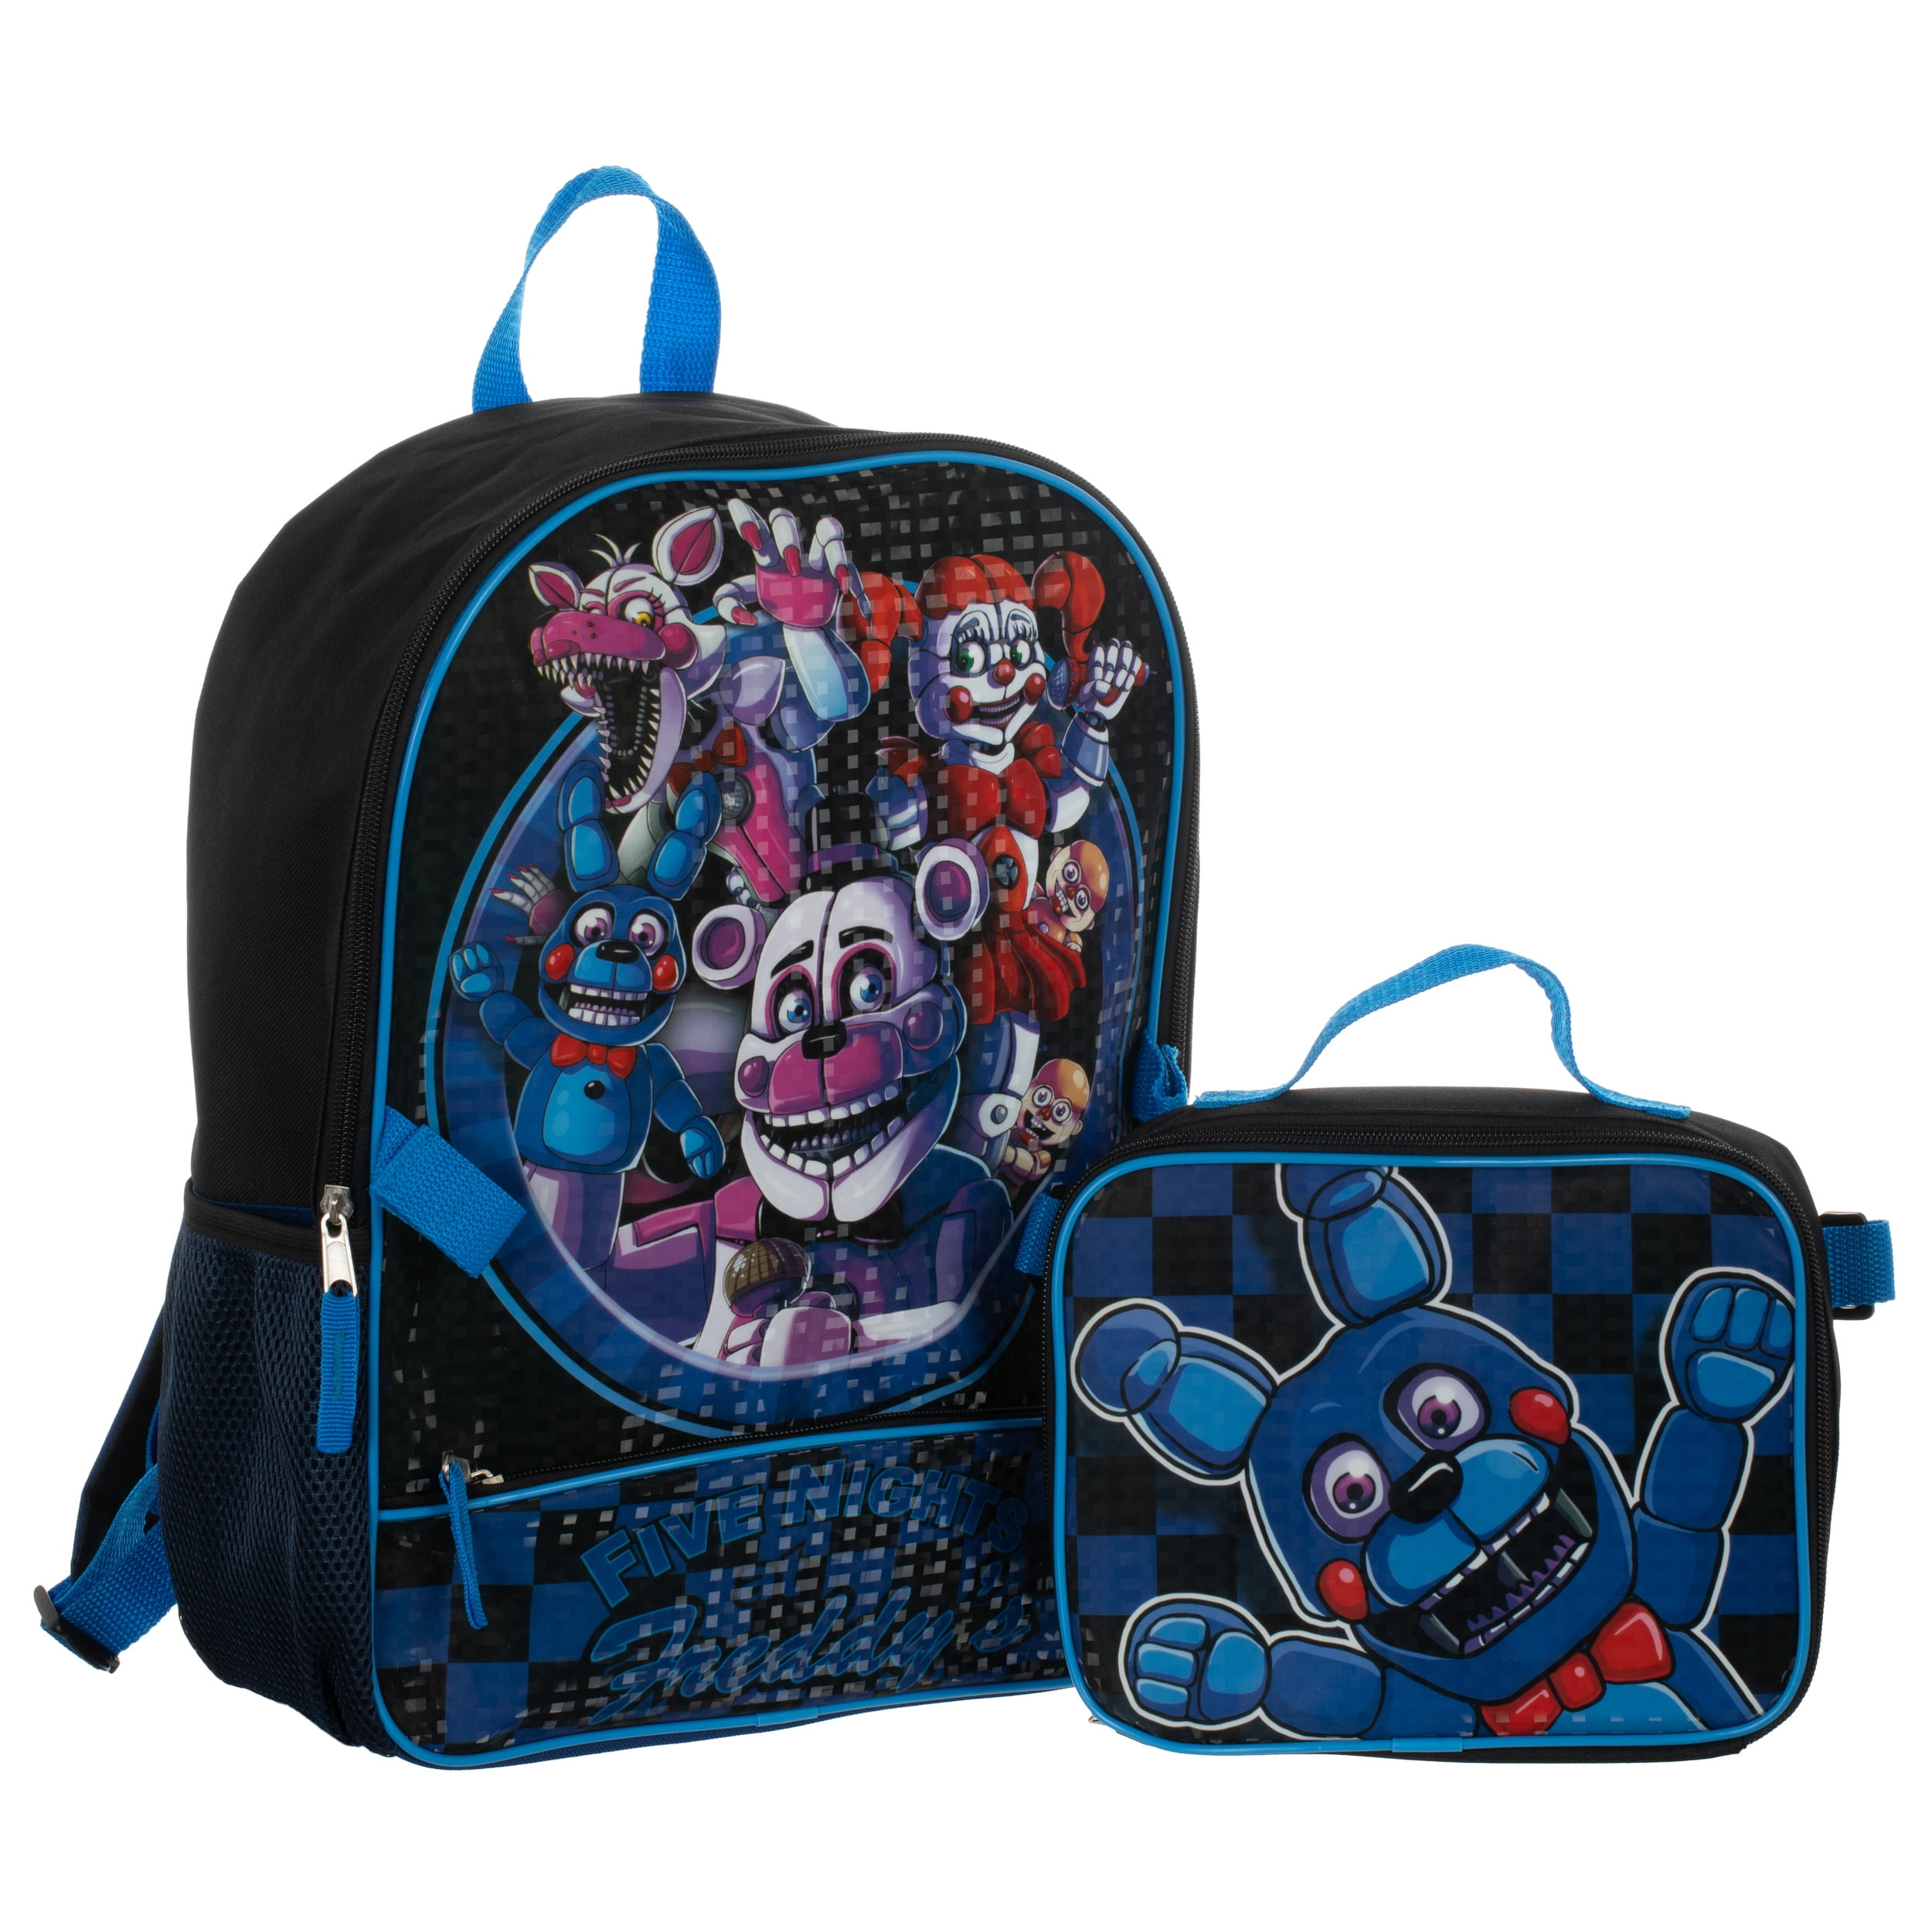 BIOWORLD Five Nights at Freddy's Backpack Set